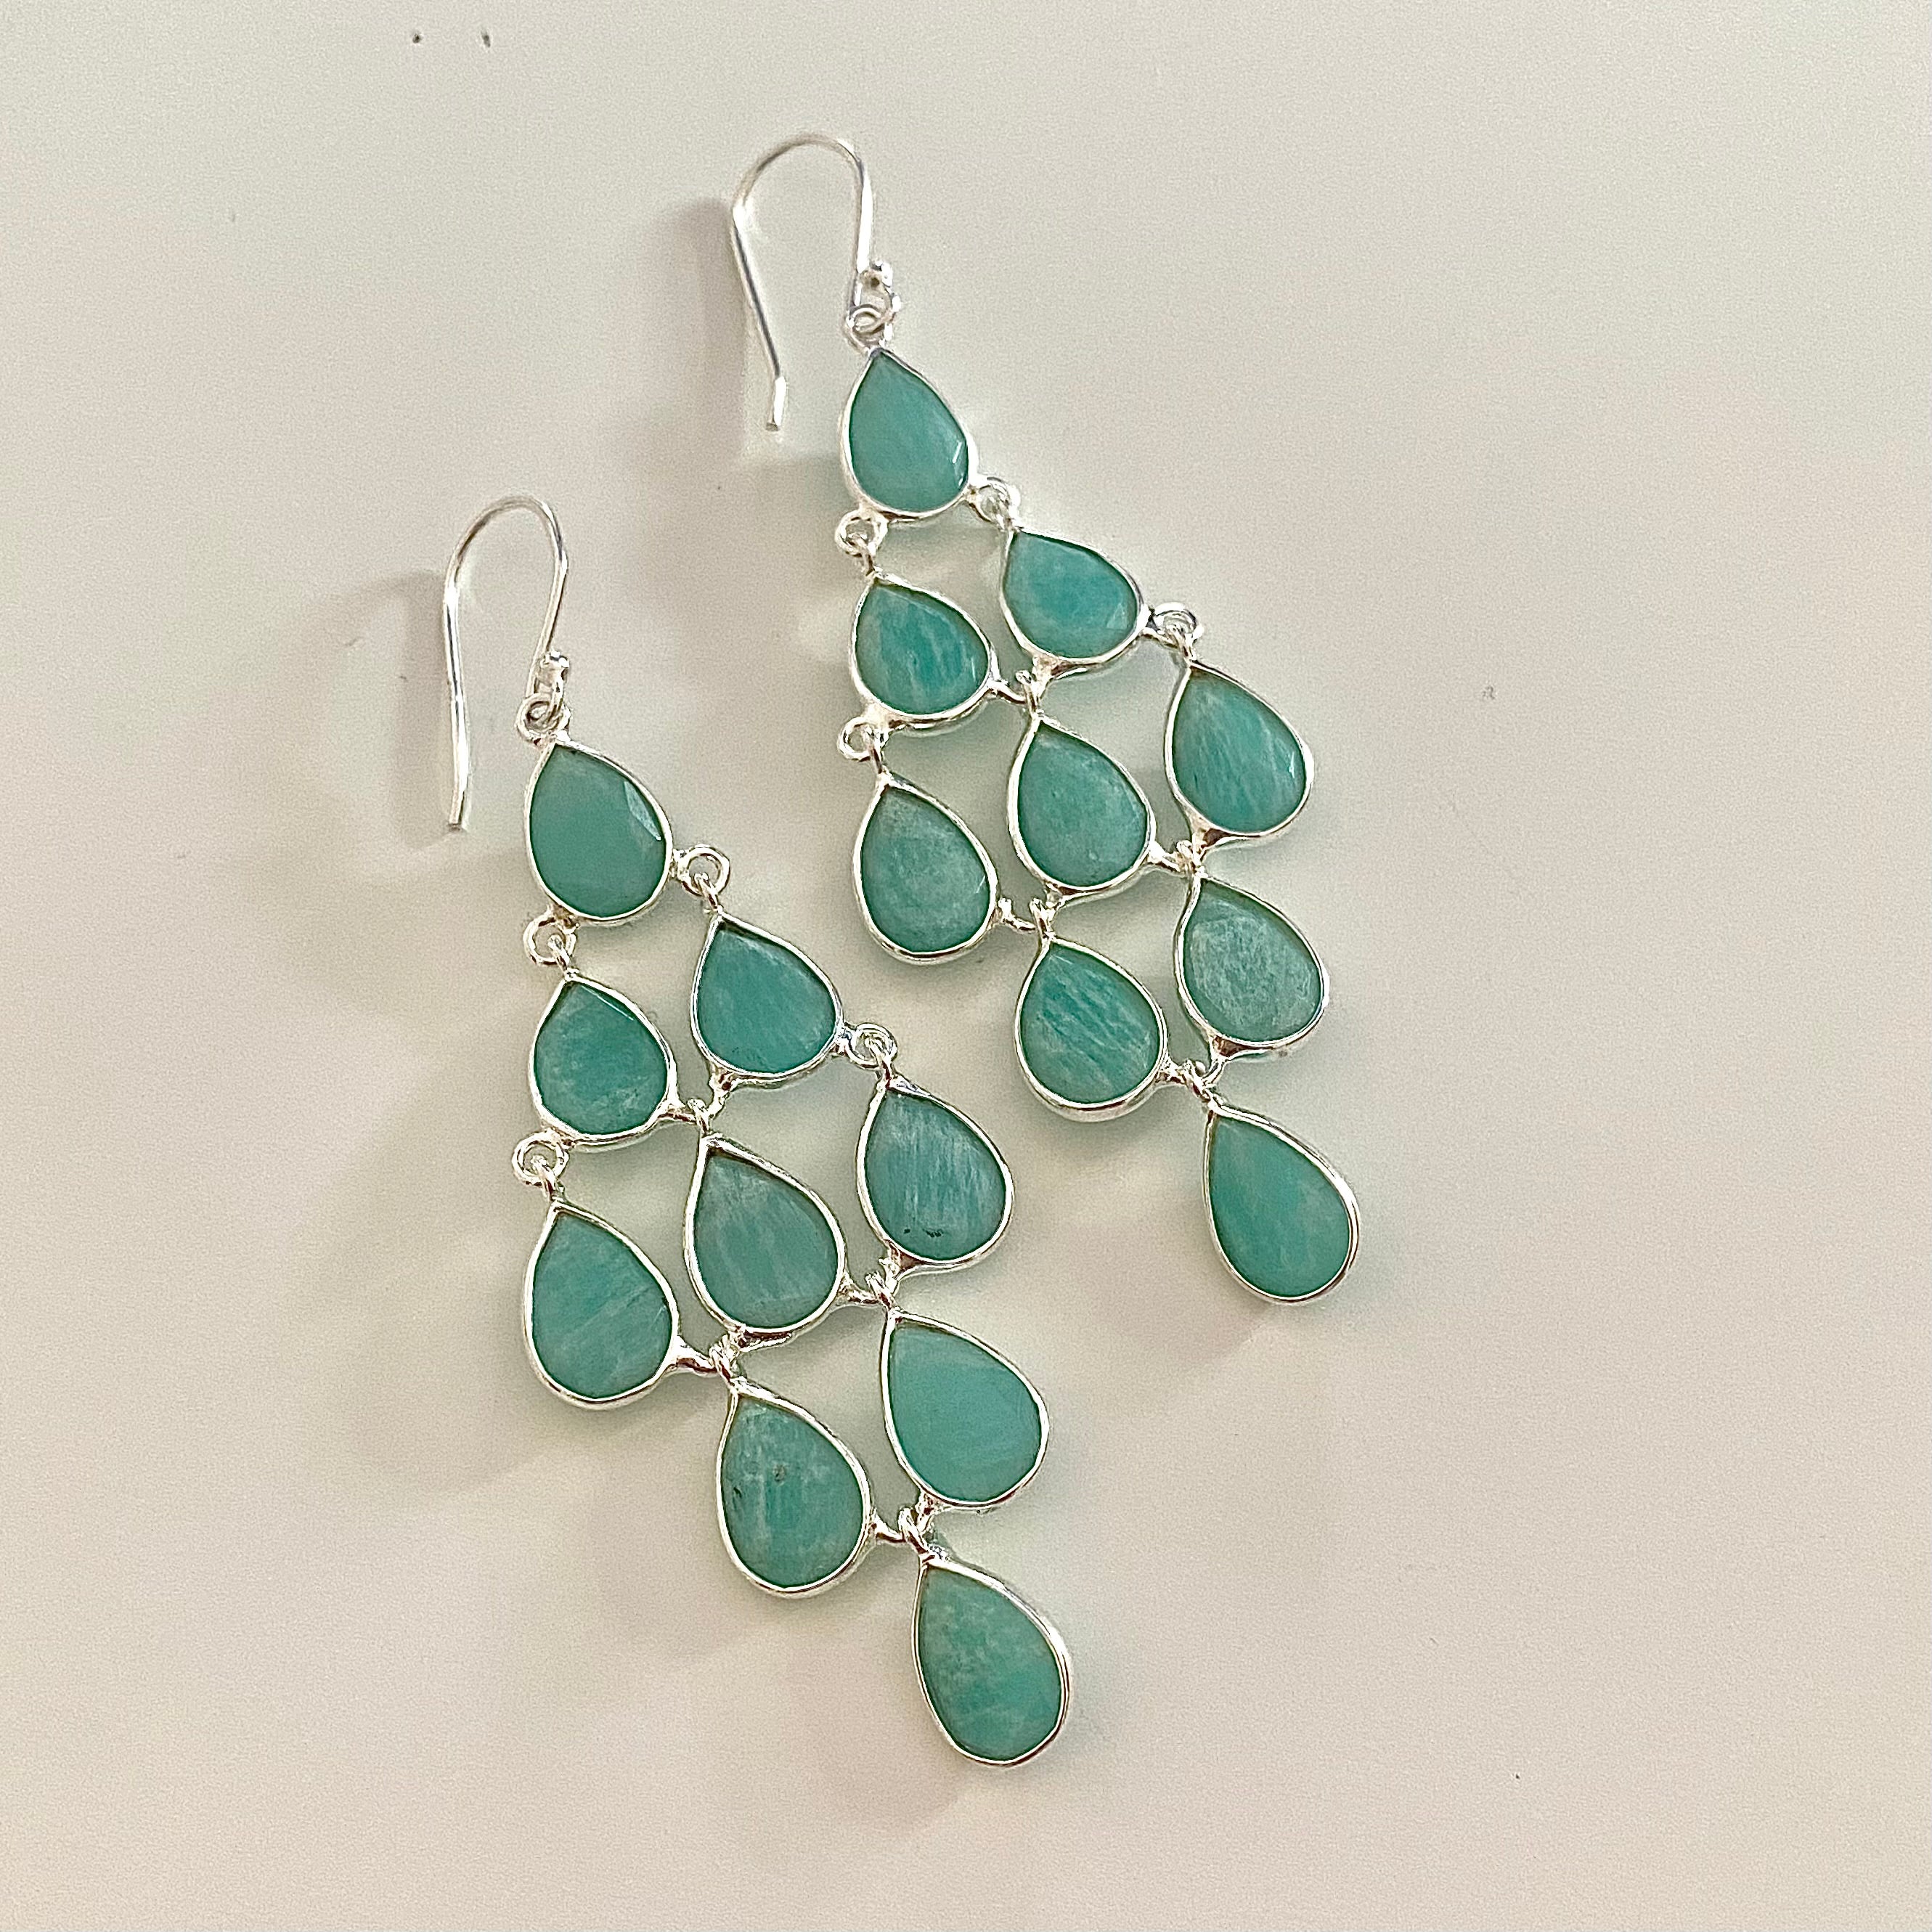 Sterling Silver Chandelier Earrings with Natural Gemstones - Amazonite